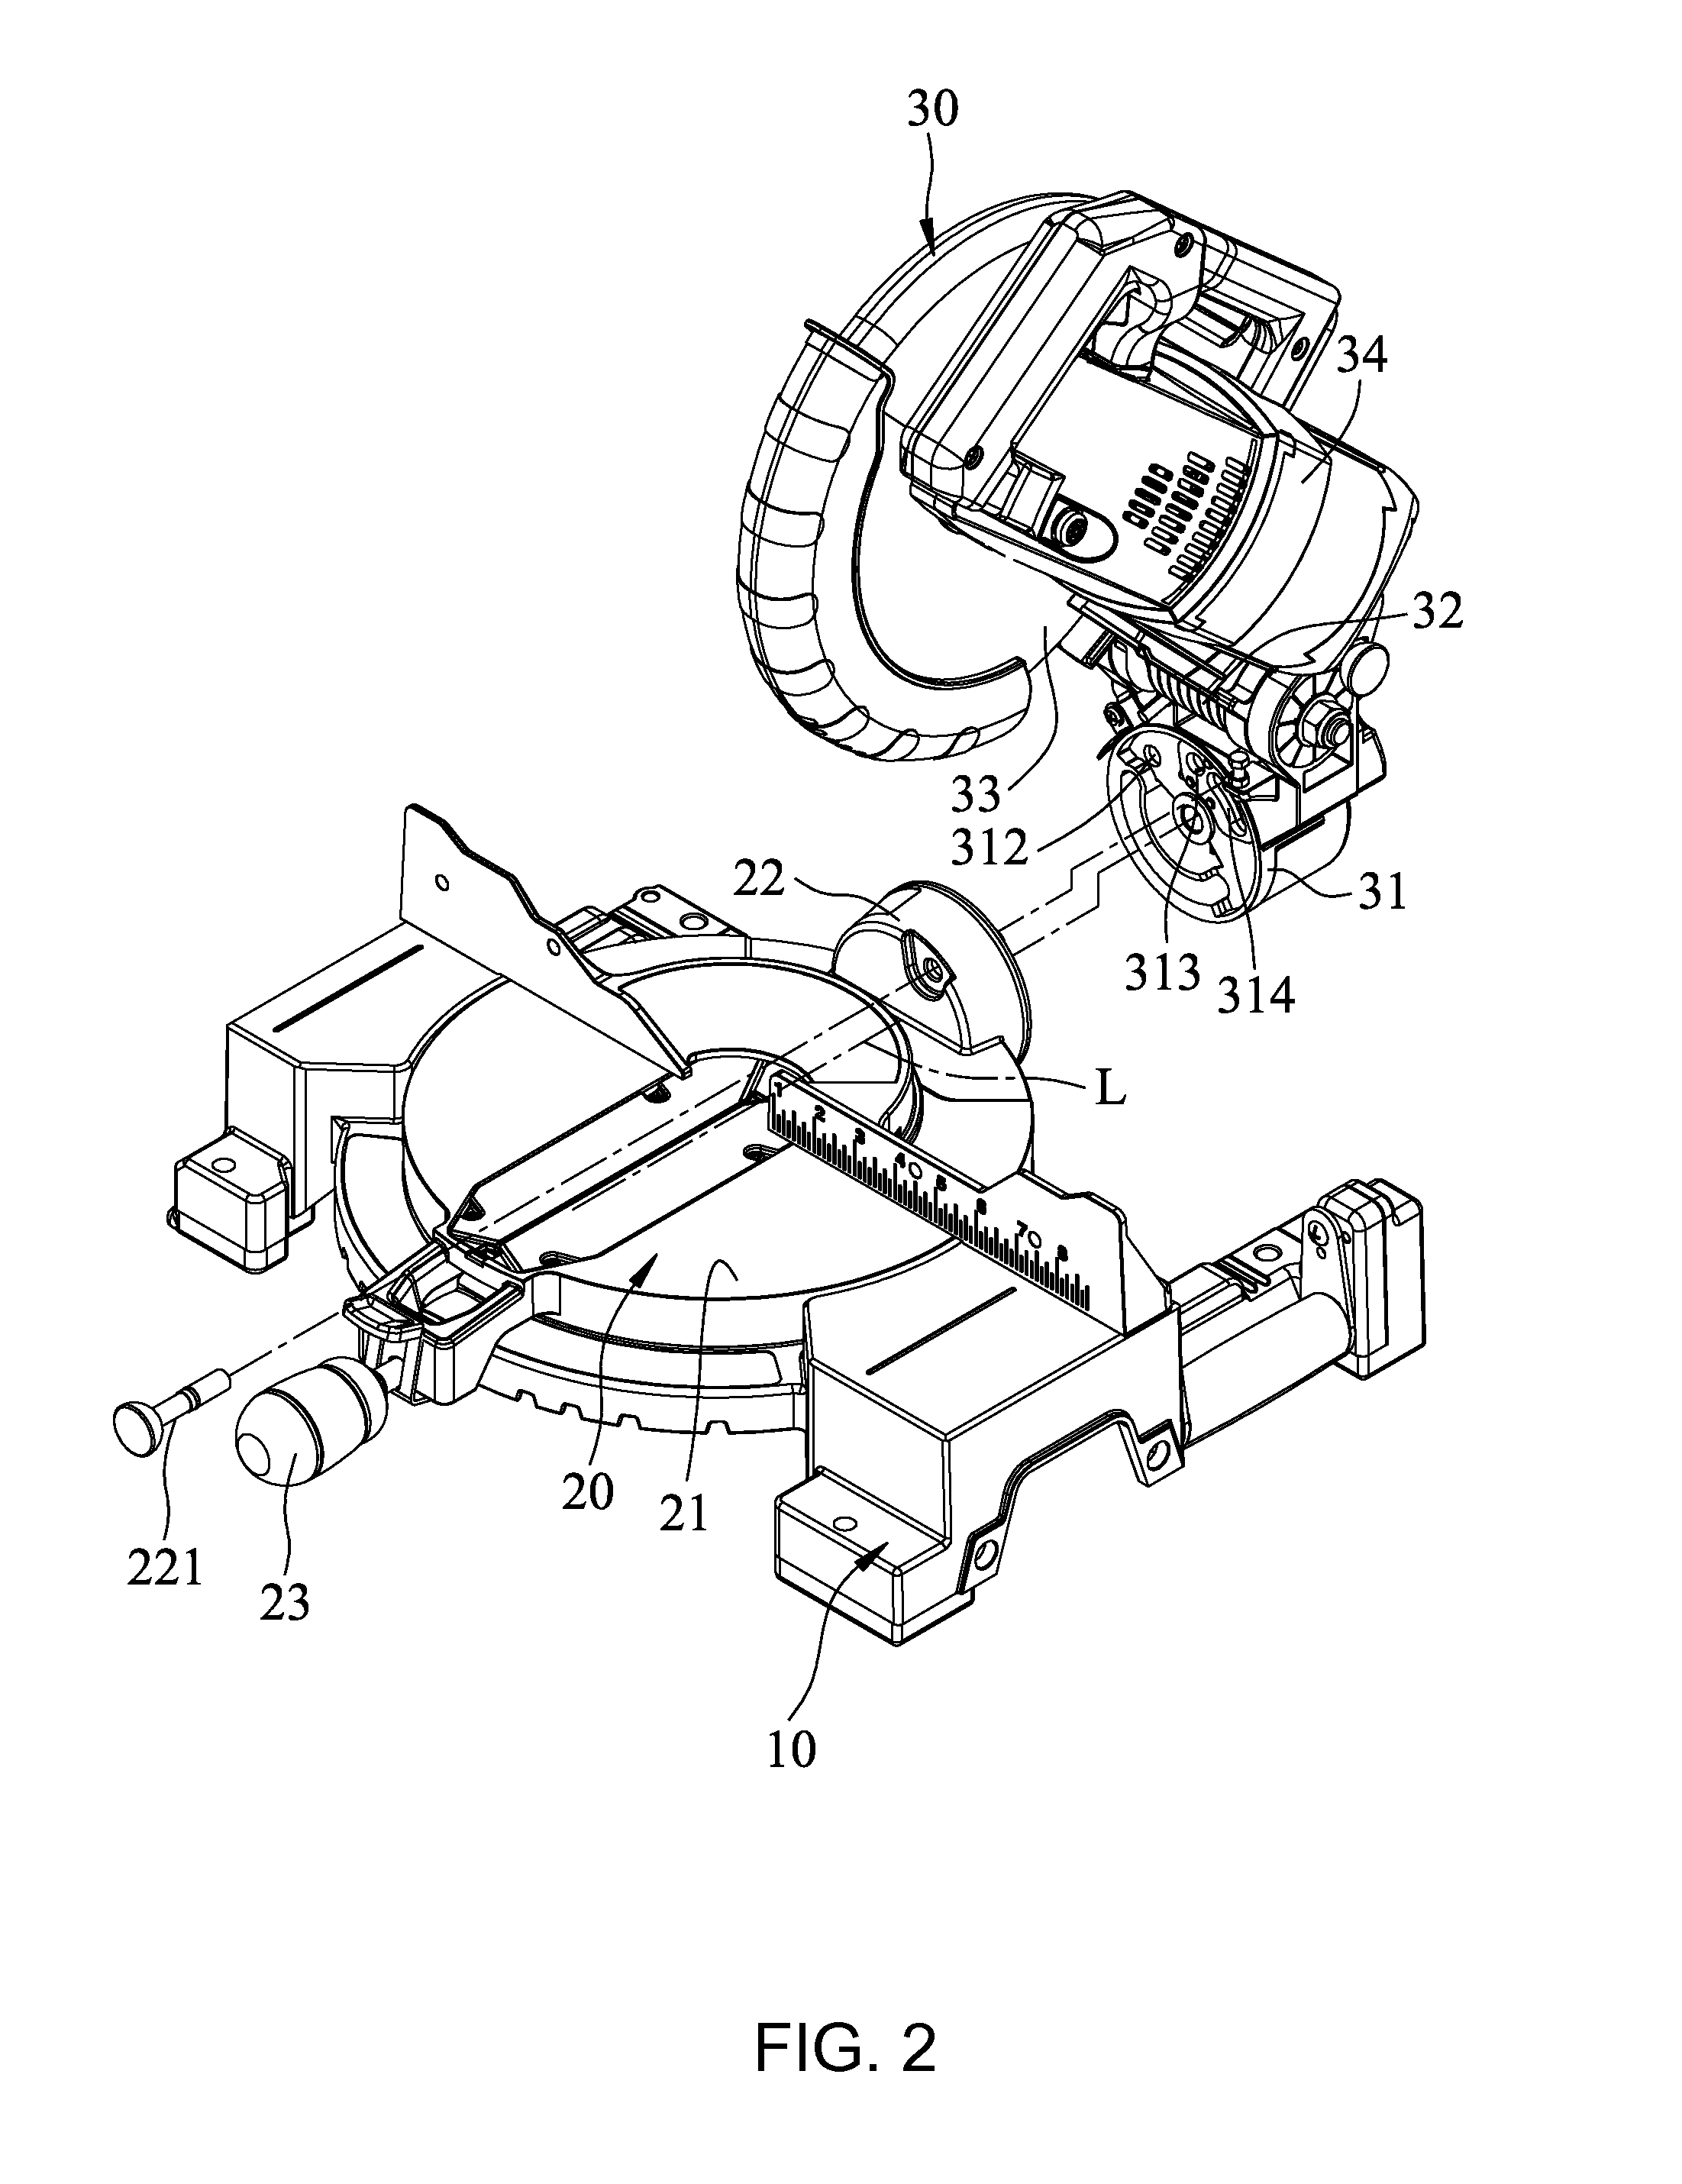 Foldable miter saw having a safety device